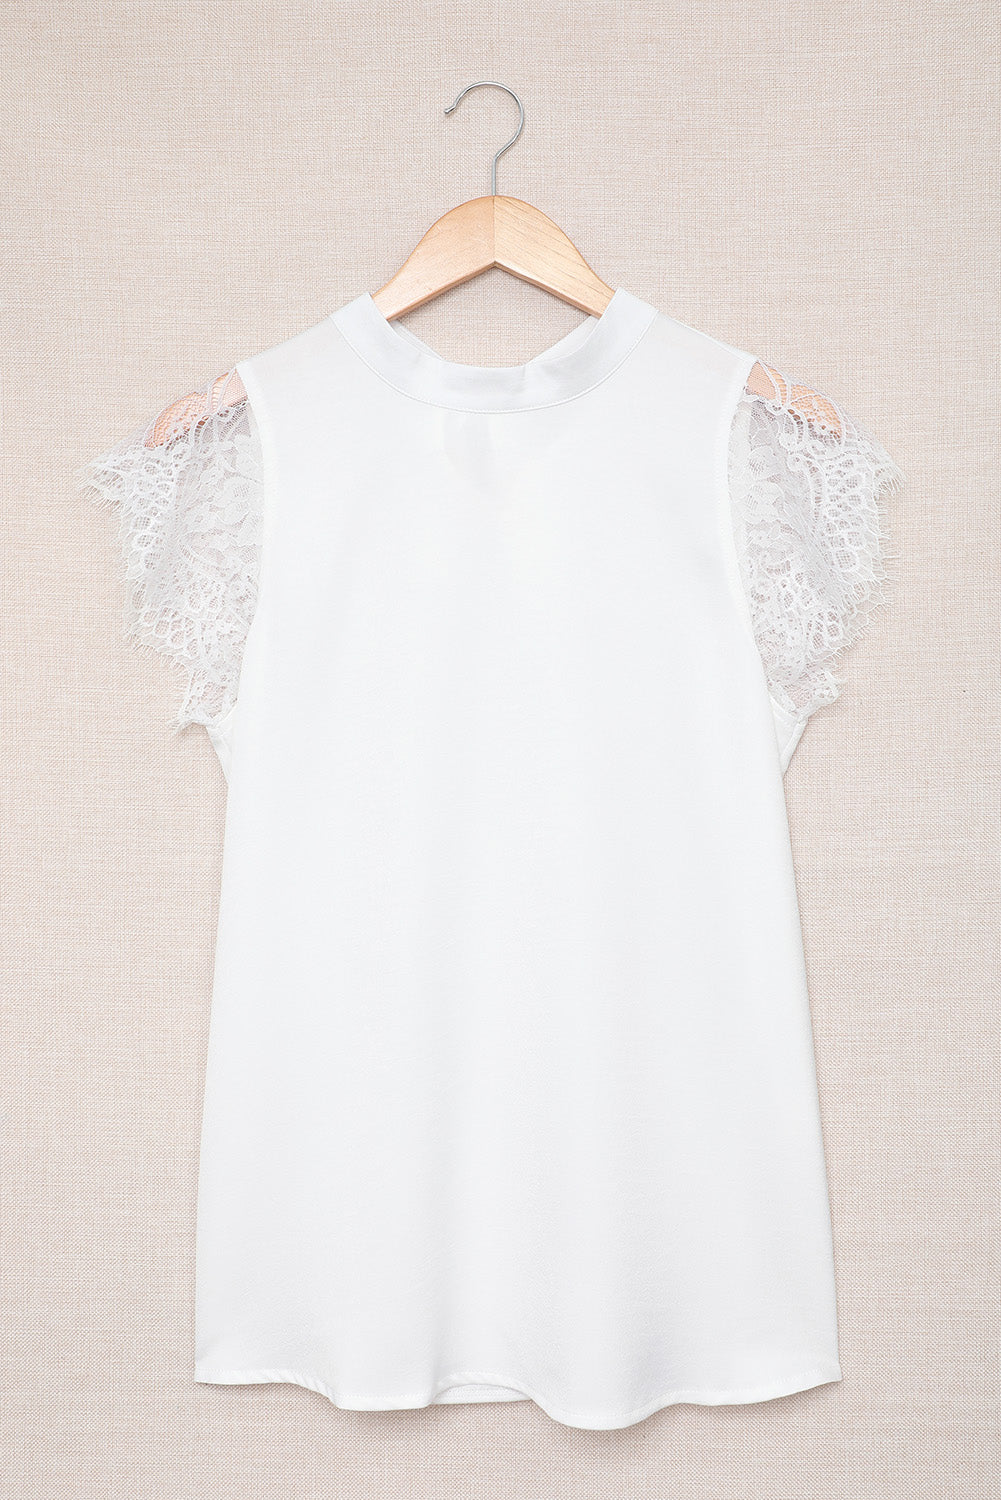 Lace Splicing Tie Knot Mock Neck T-Shirt